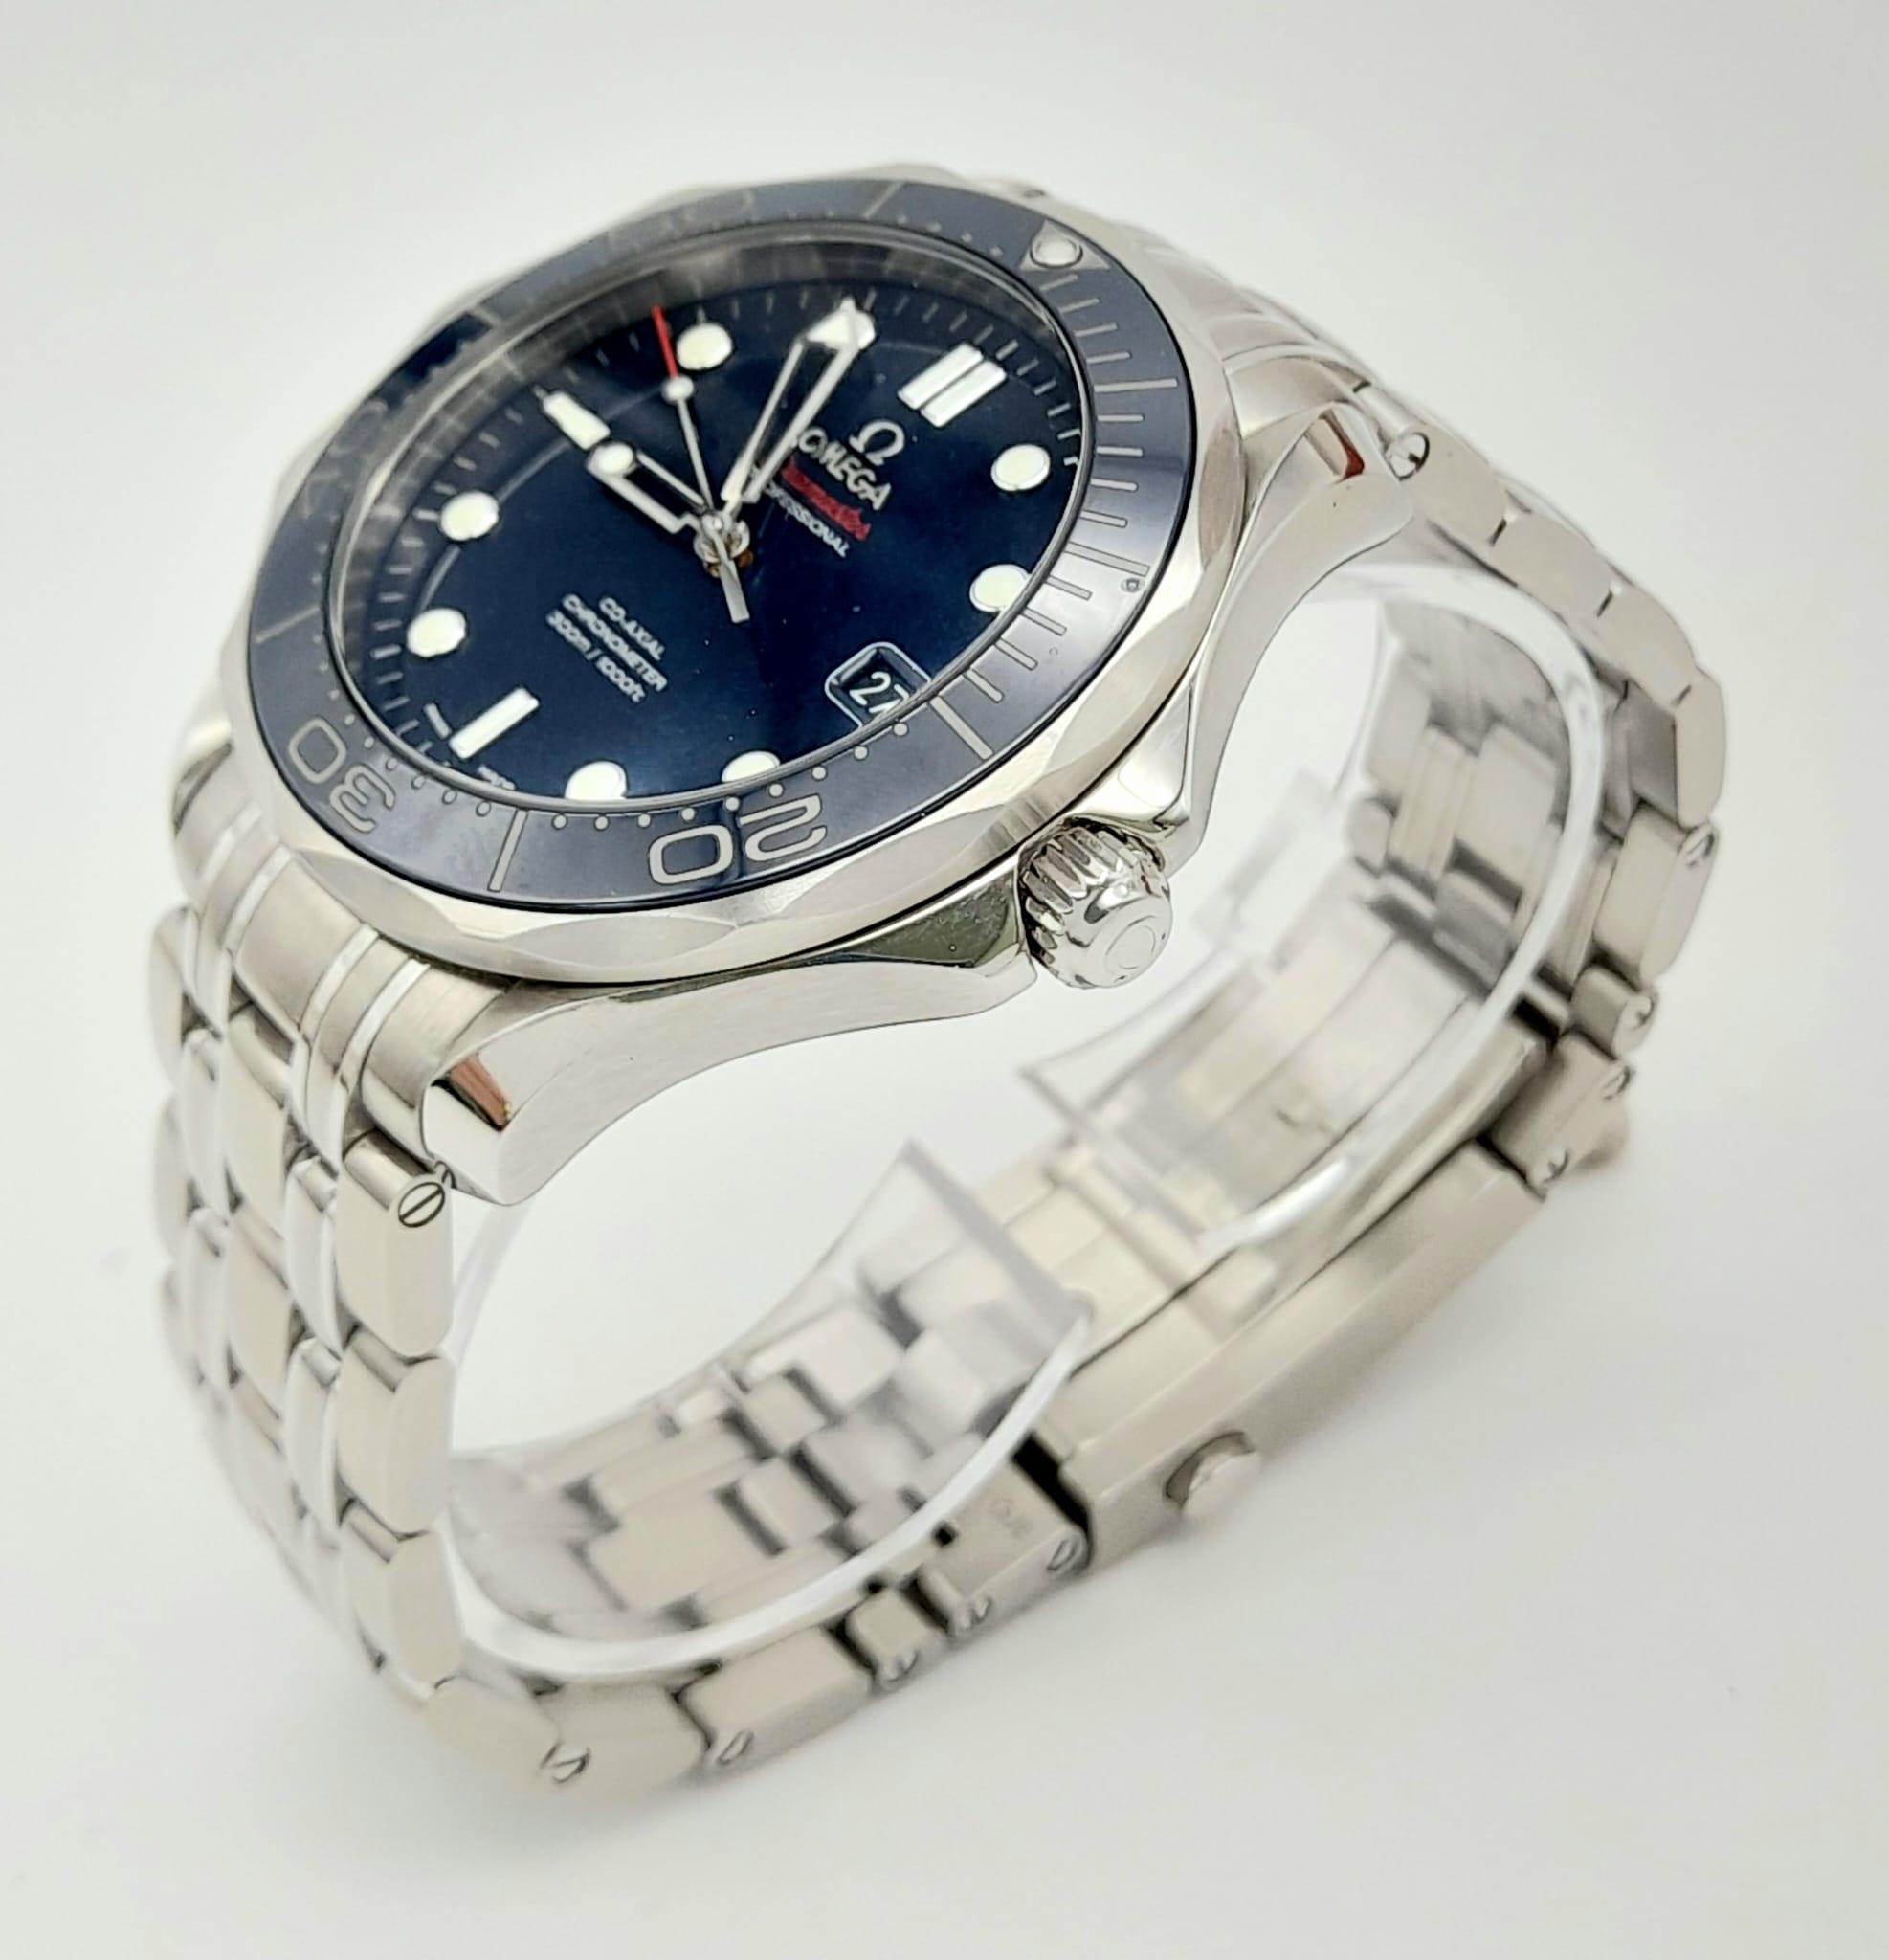 AN OMEGA SEAMASTER "PROFESSIONAL" CHRONOMETER IN STAINLESS STEEL WITH MATCHING BLUE DIAL AND - Image 3 of 29